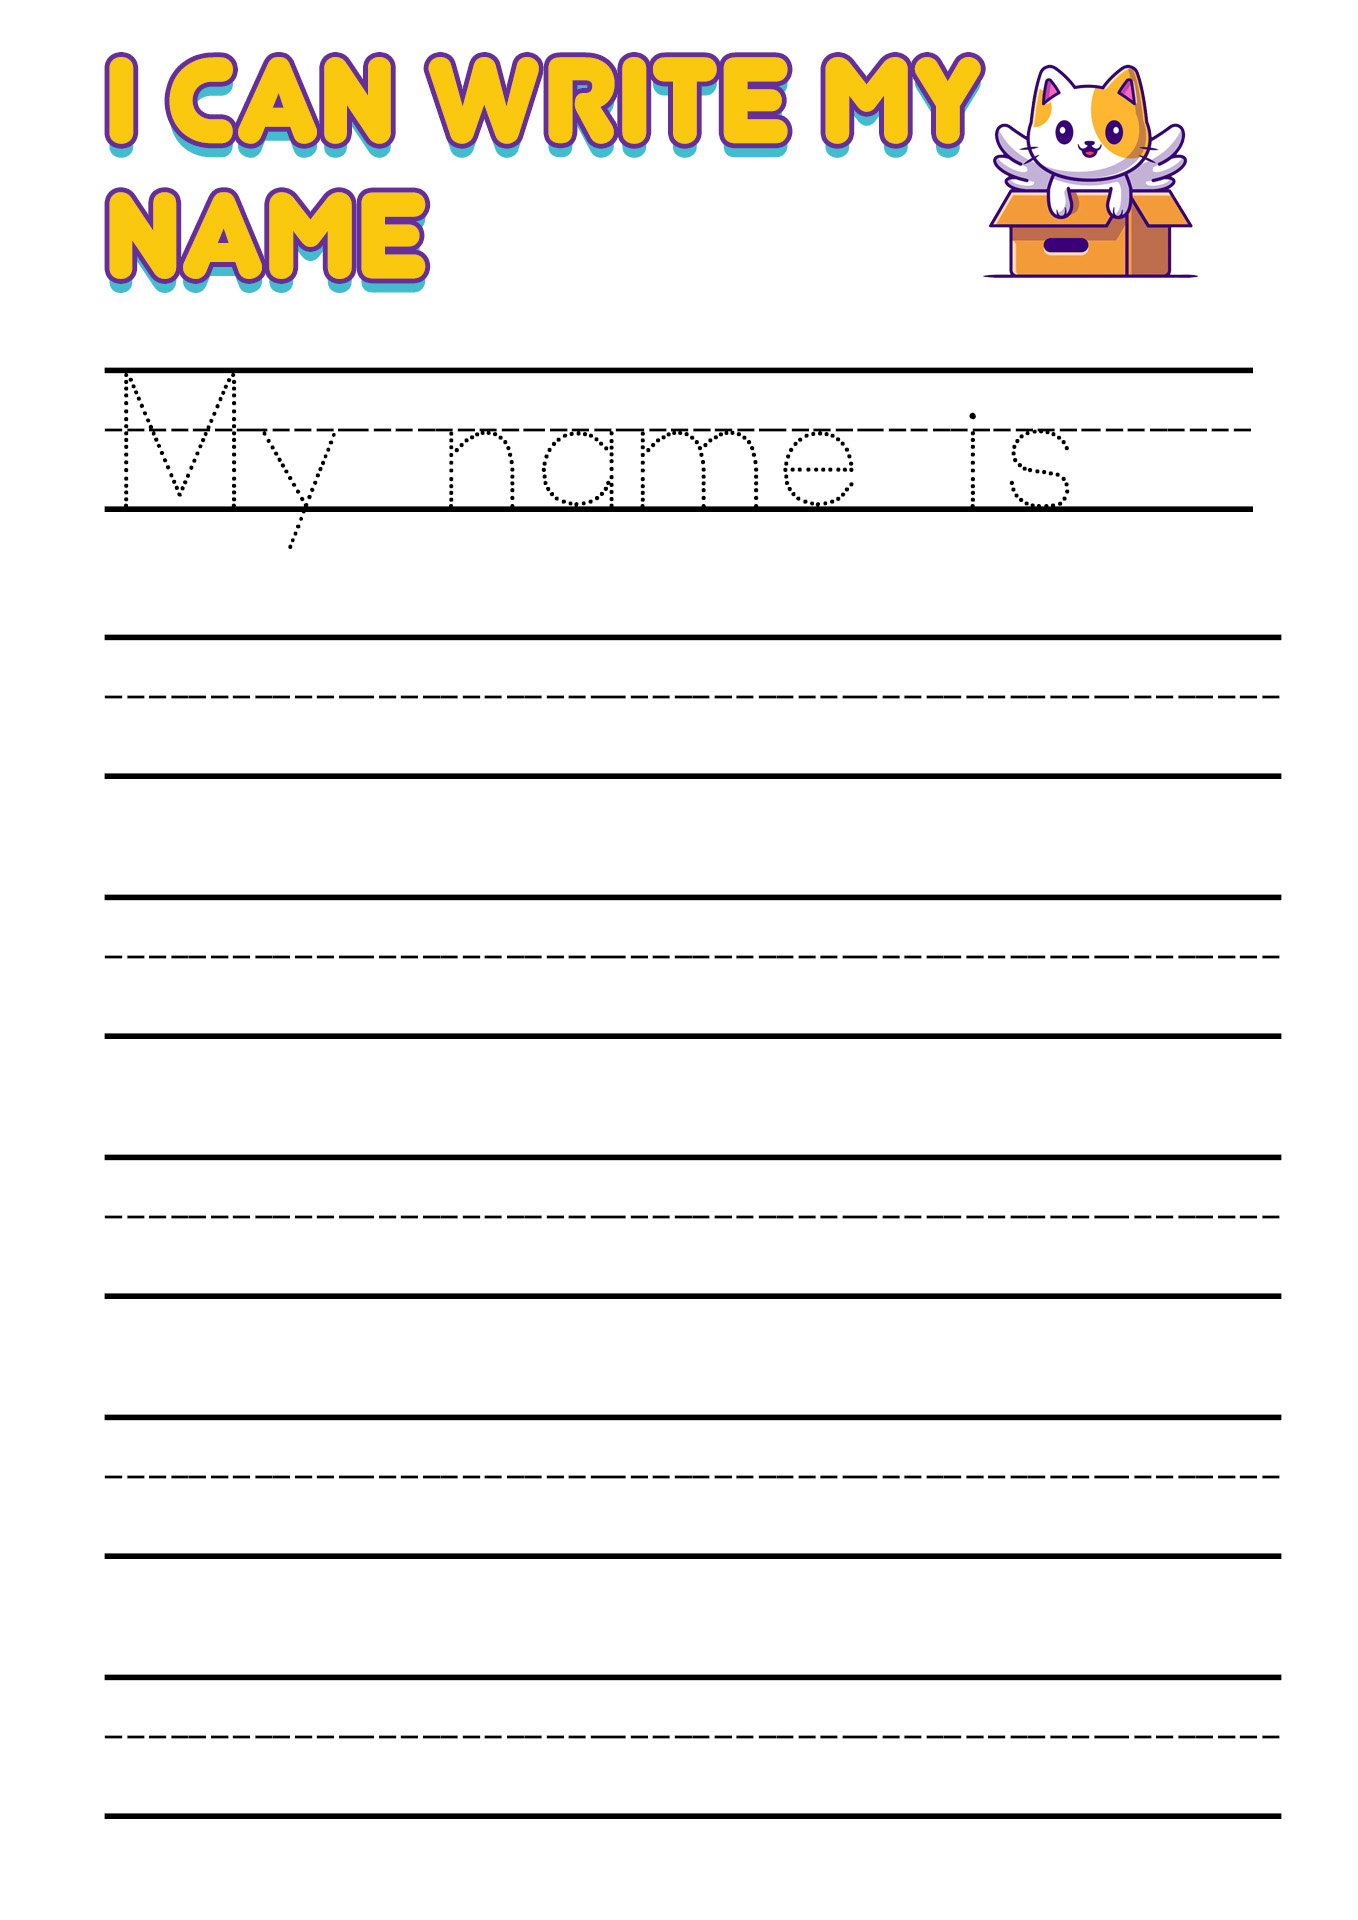 Write Your Name Worksheets Image